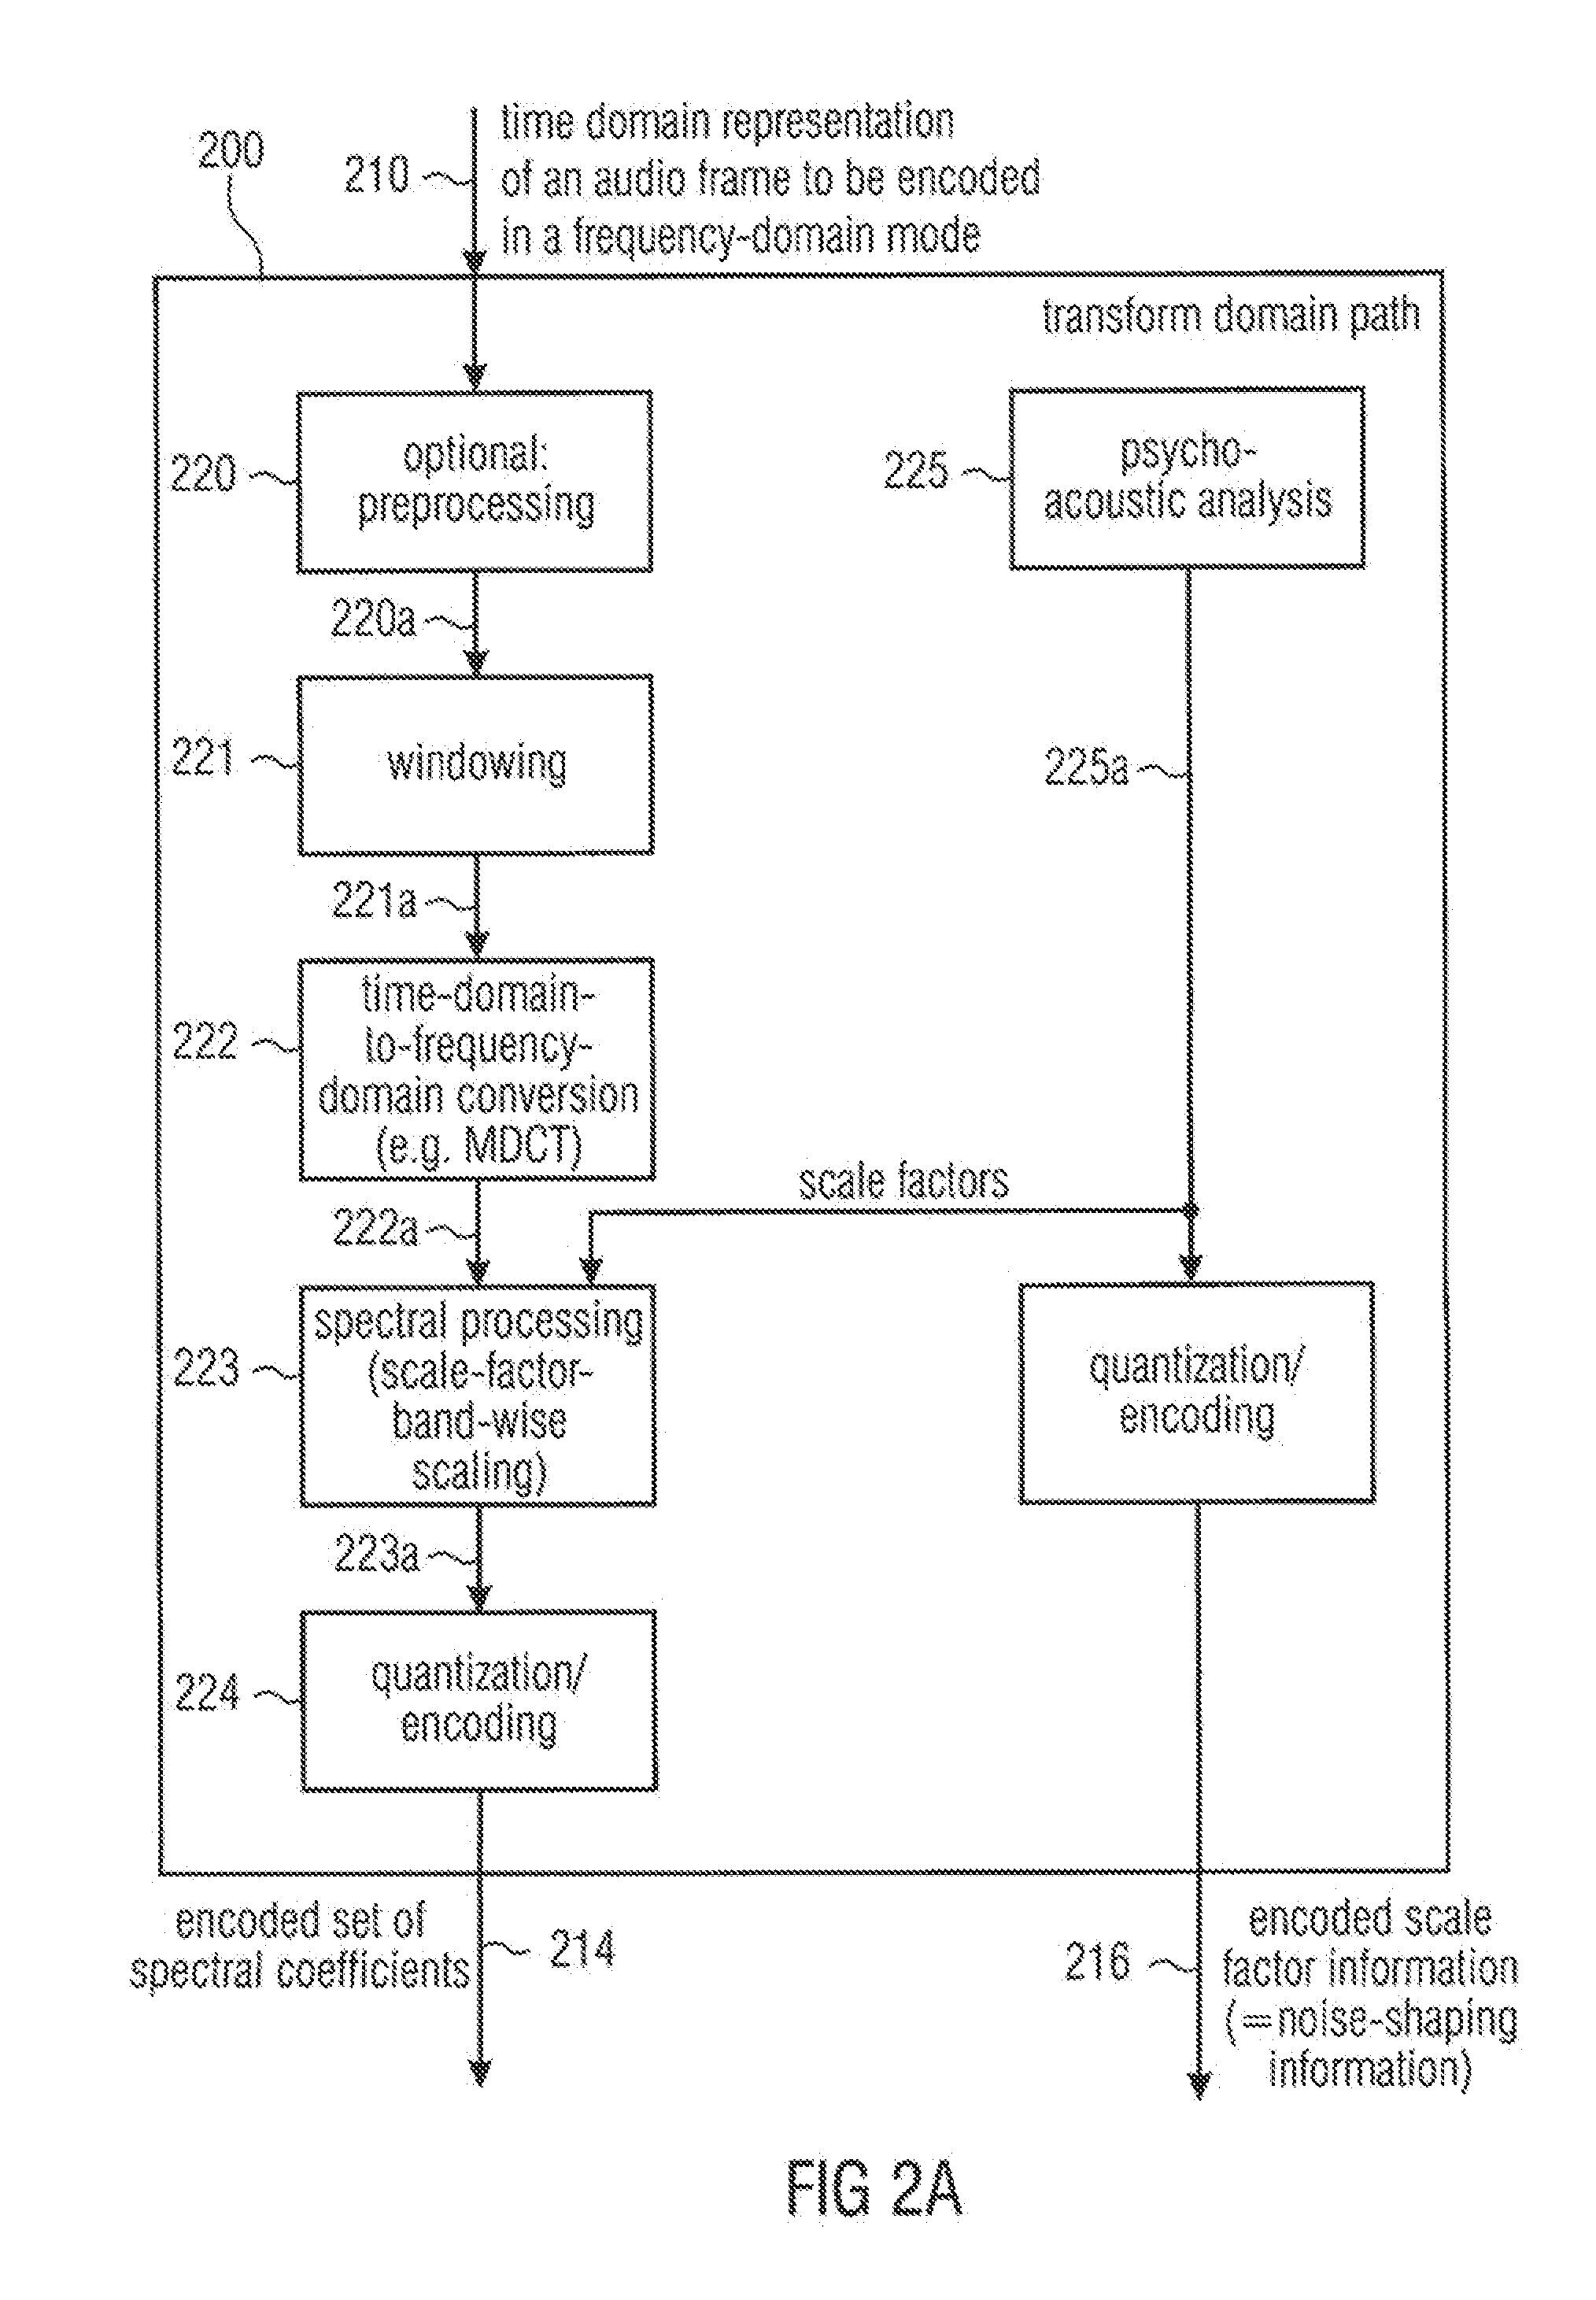 Audio signal encoder, audio signal decoder, method for providing an encoded representation of an audio content, method for providing a decoded representation of an audio content and computer program for use in low delay applications